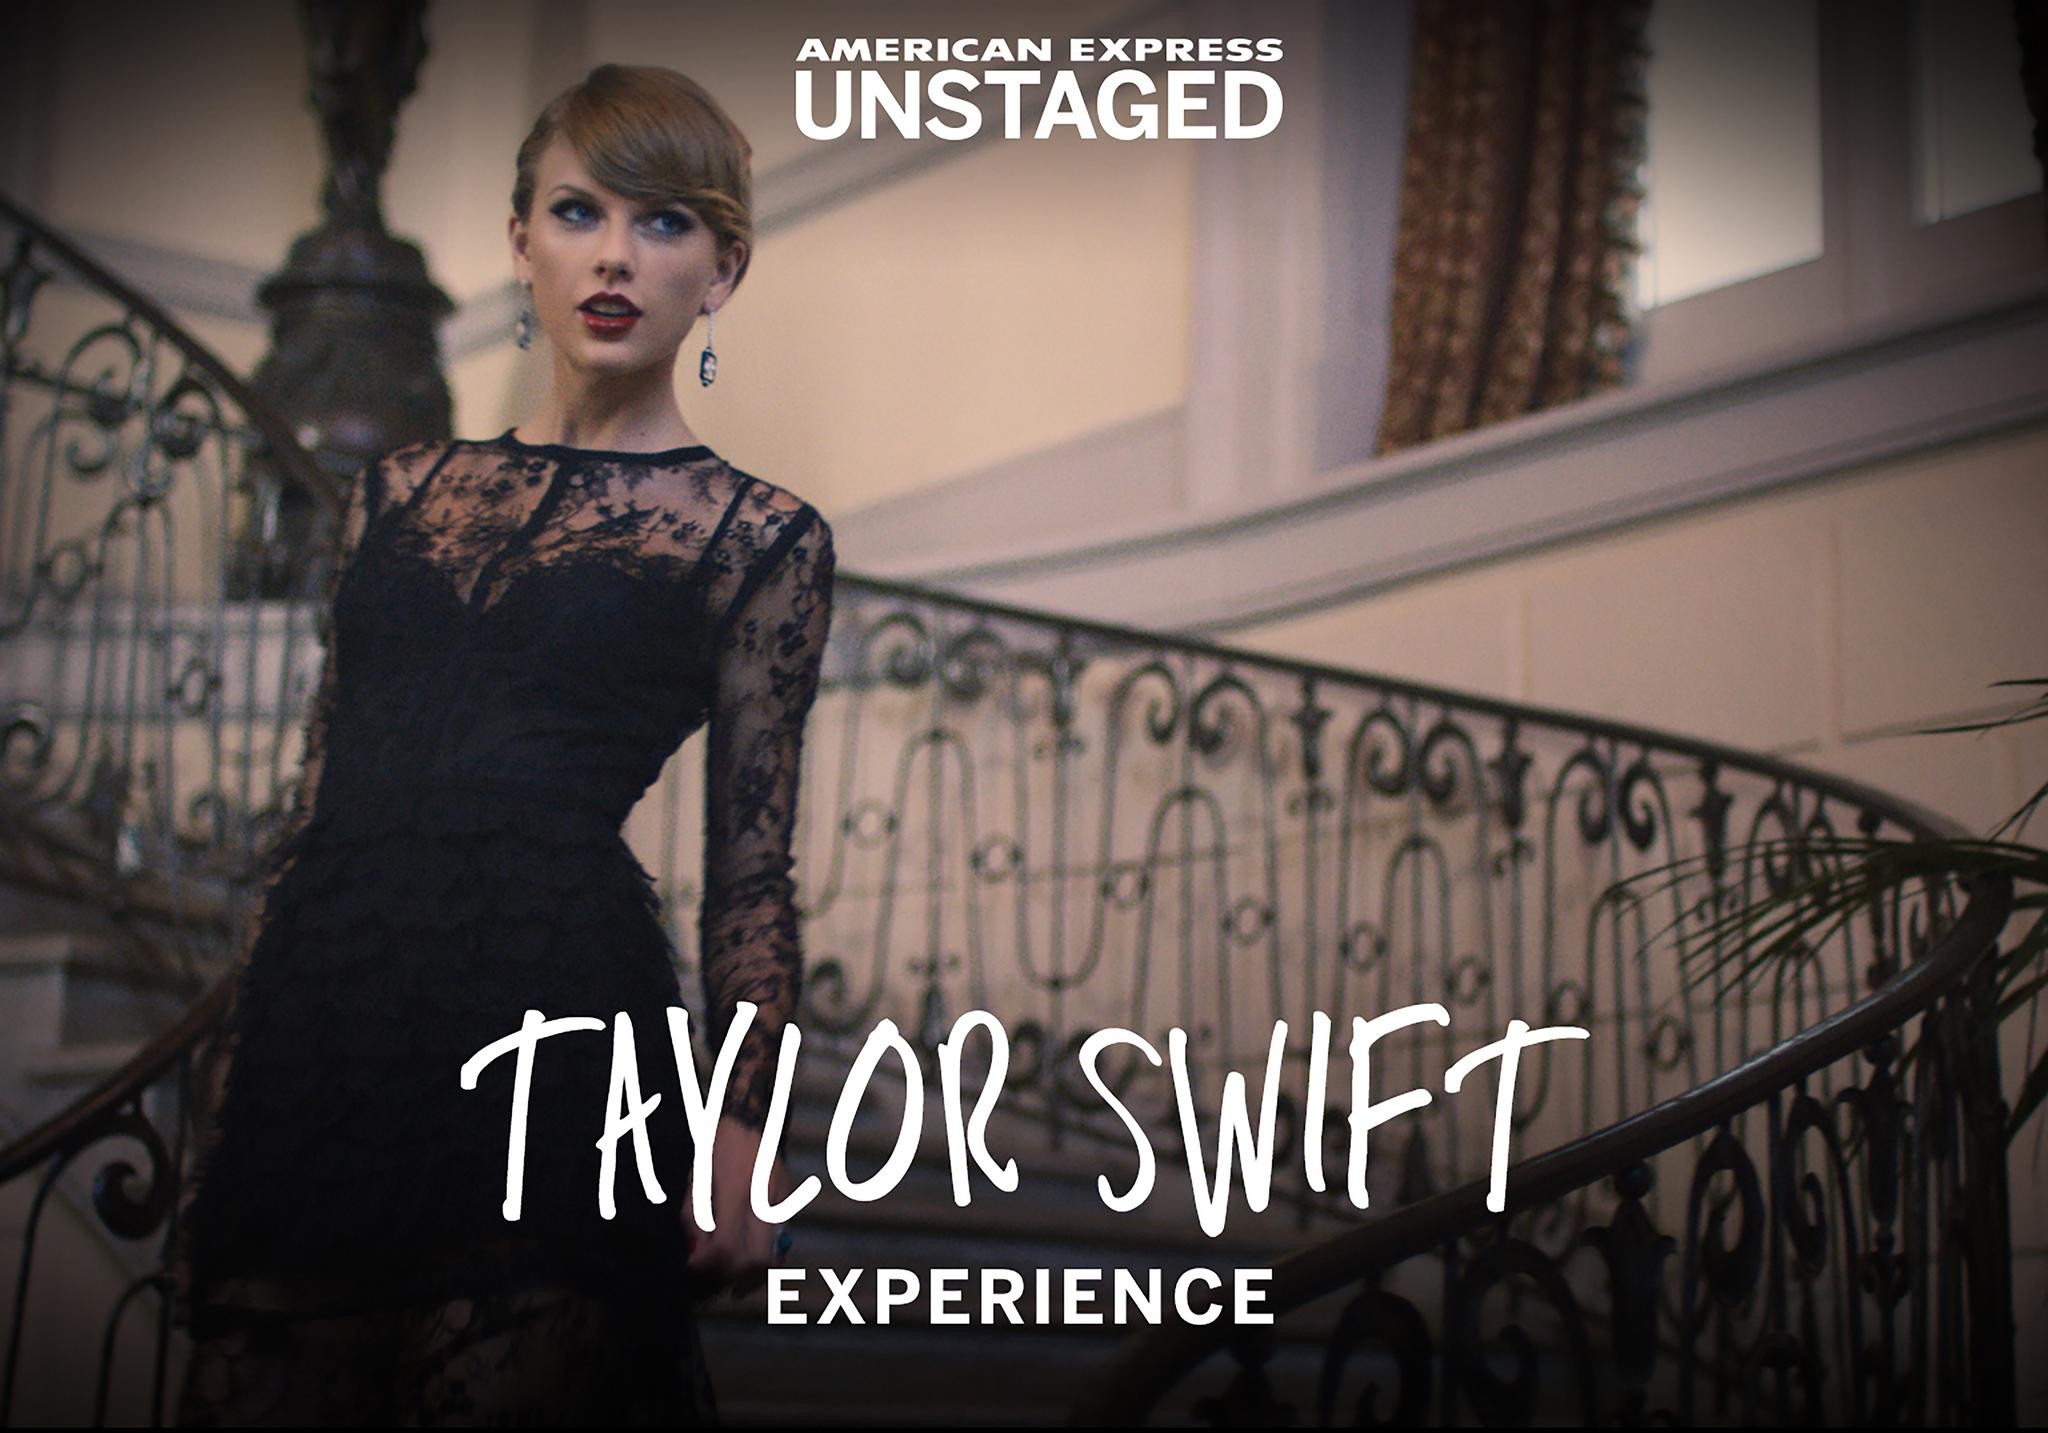 AMERICAN EXPRESS UNSTAGED: TAYLOR SWIFT EXPERIENCE